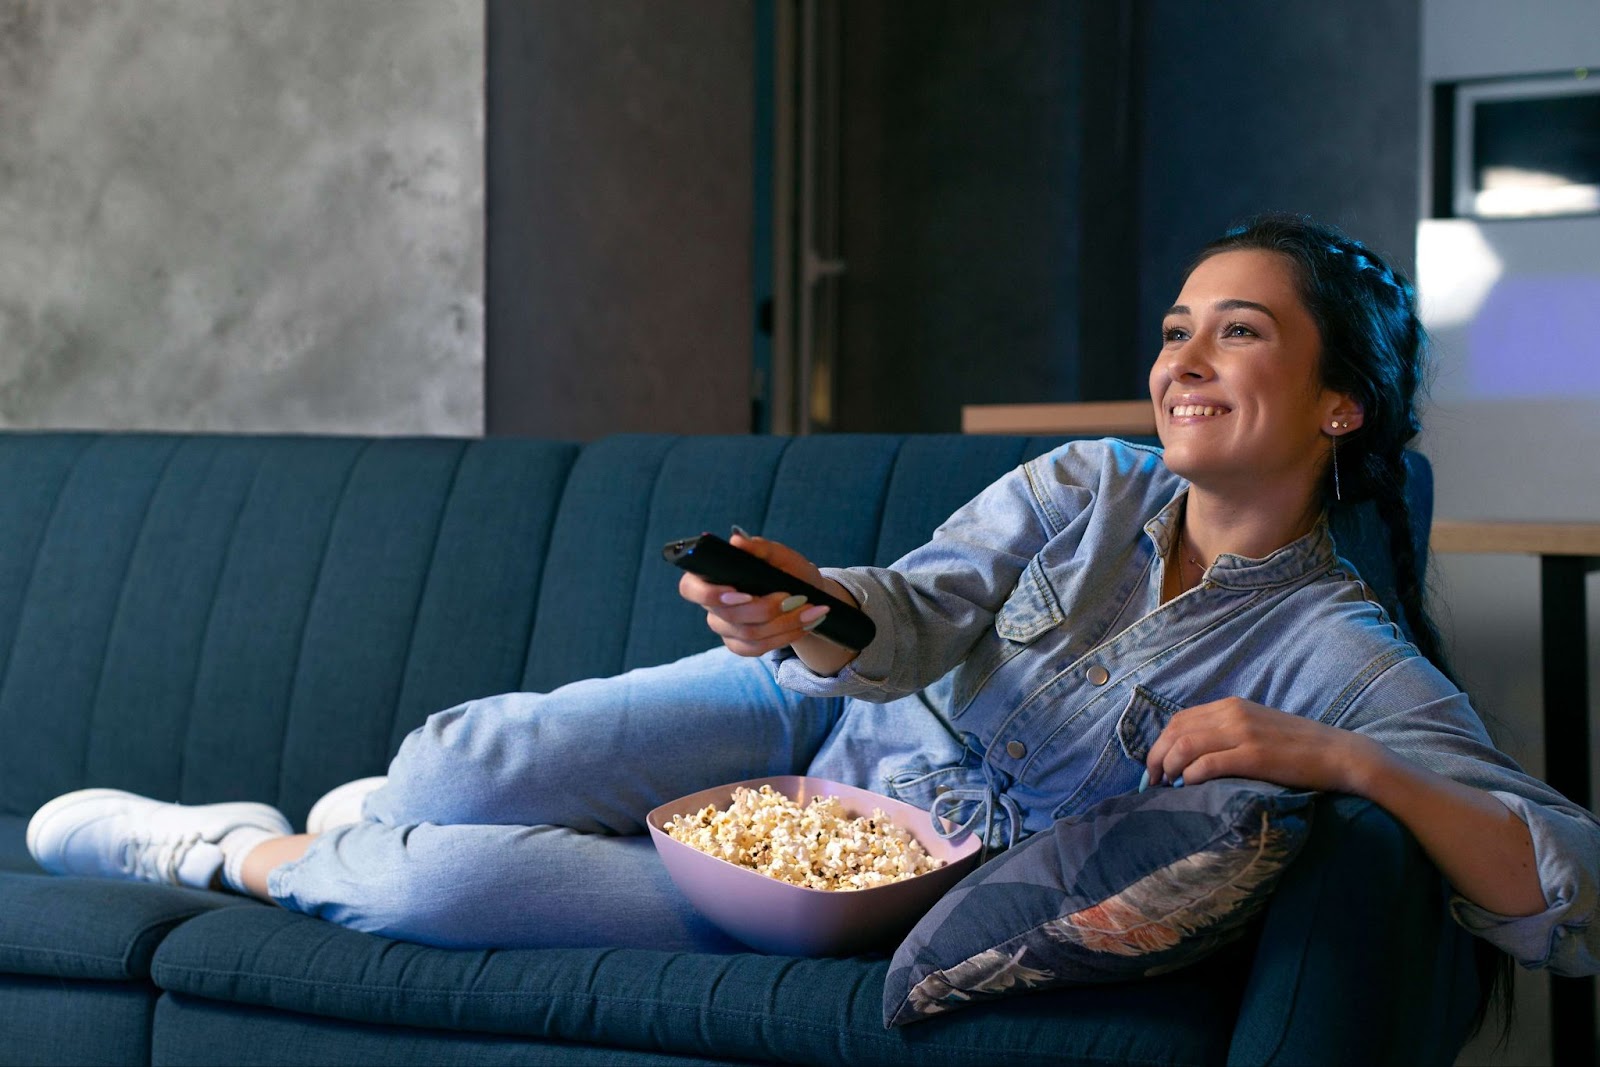 A woman eating popcorn and watching TV